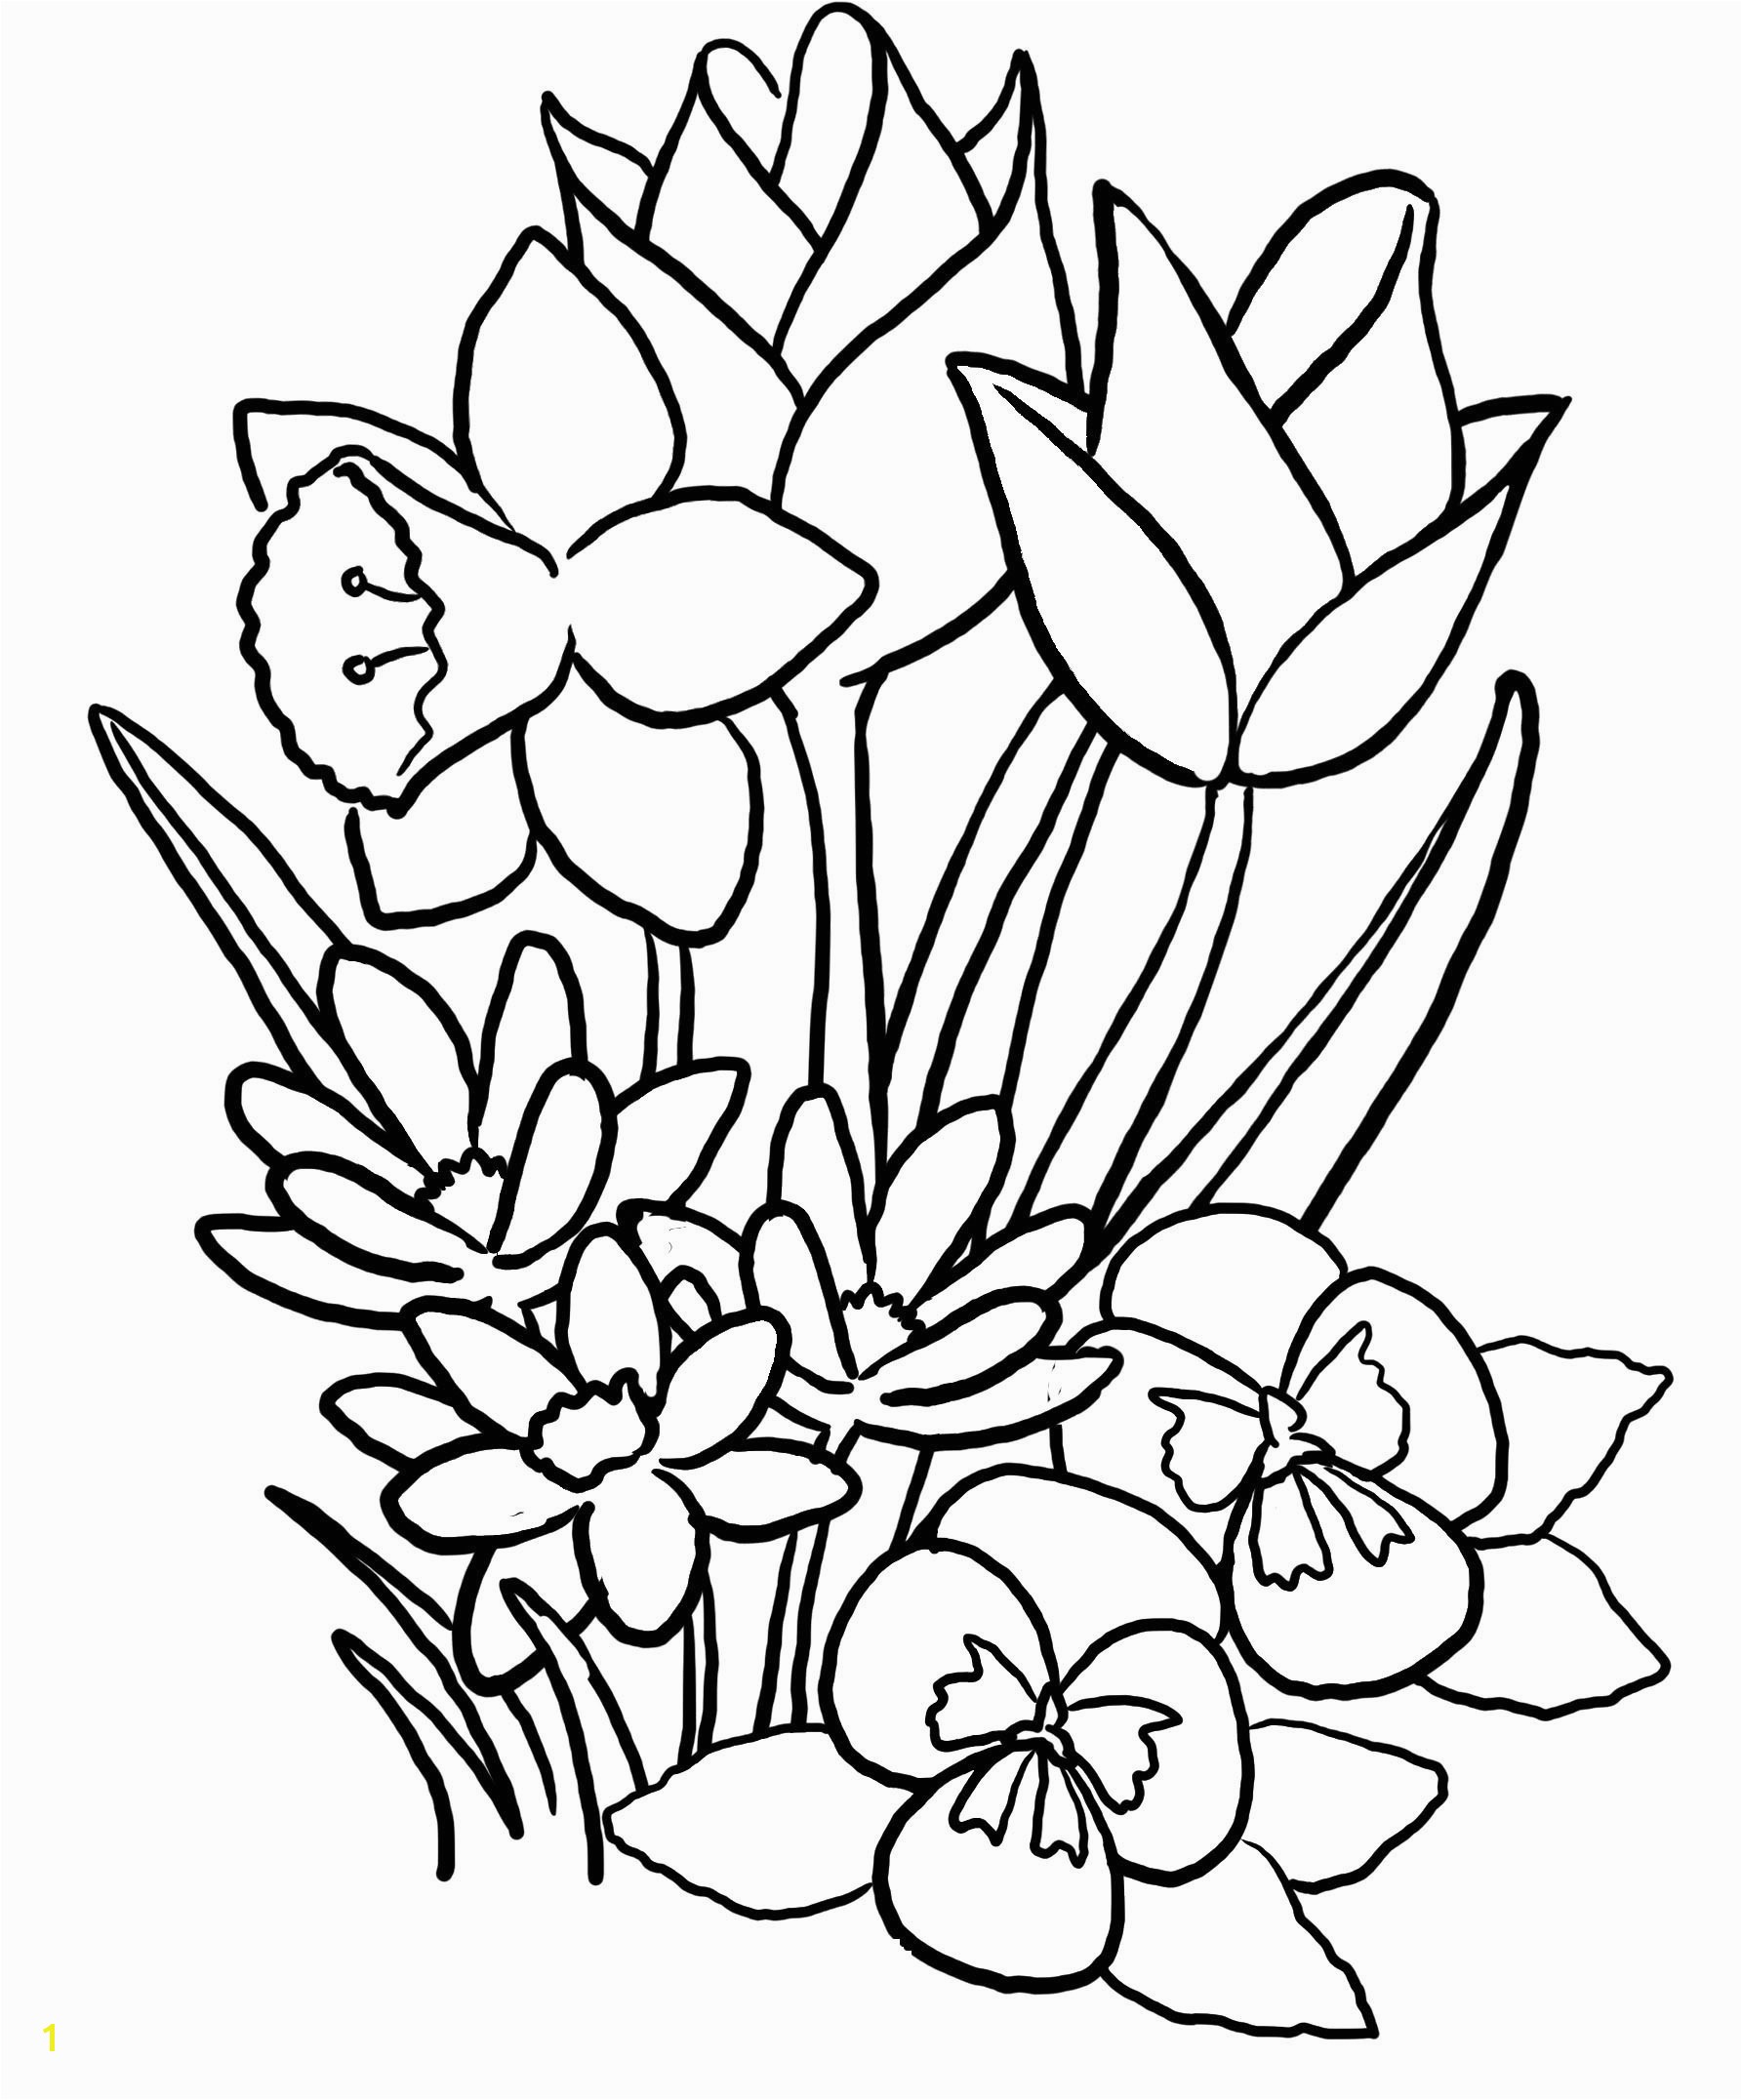 Flowers Coloring Pages Printable Coloring Flower New Coloring Flower Fresh Free Printable